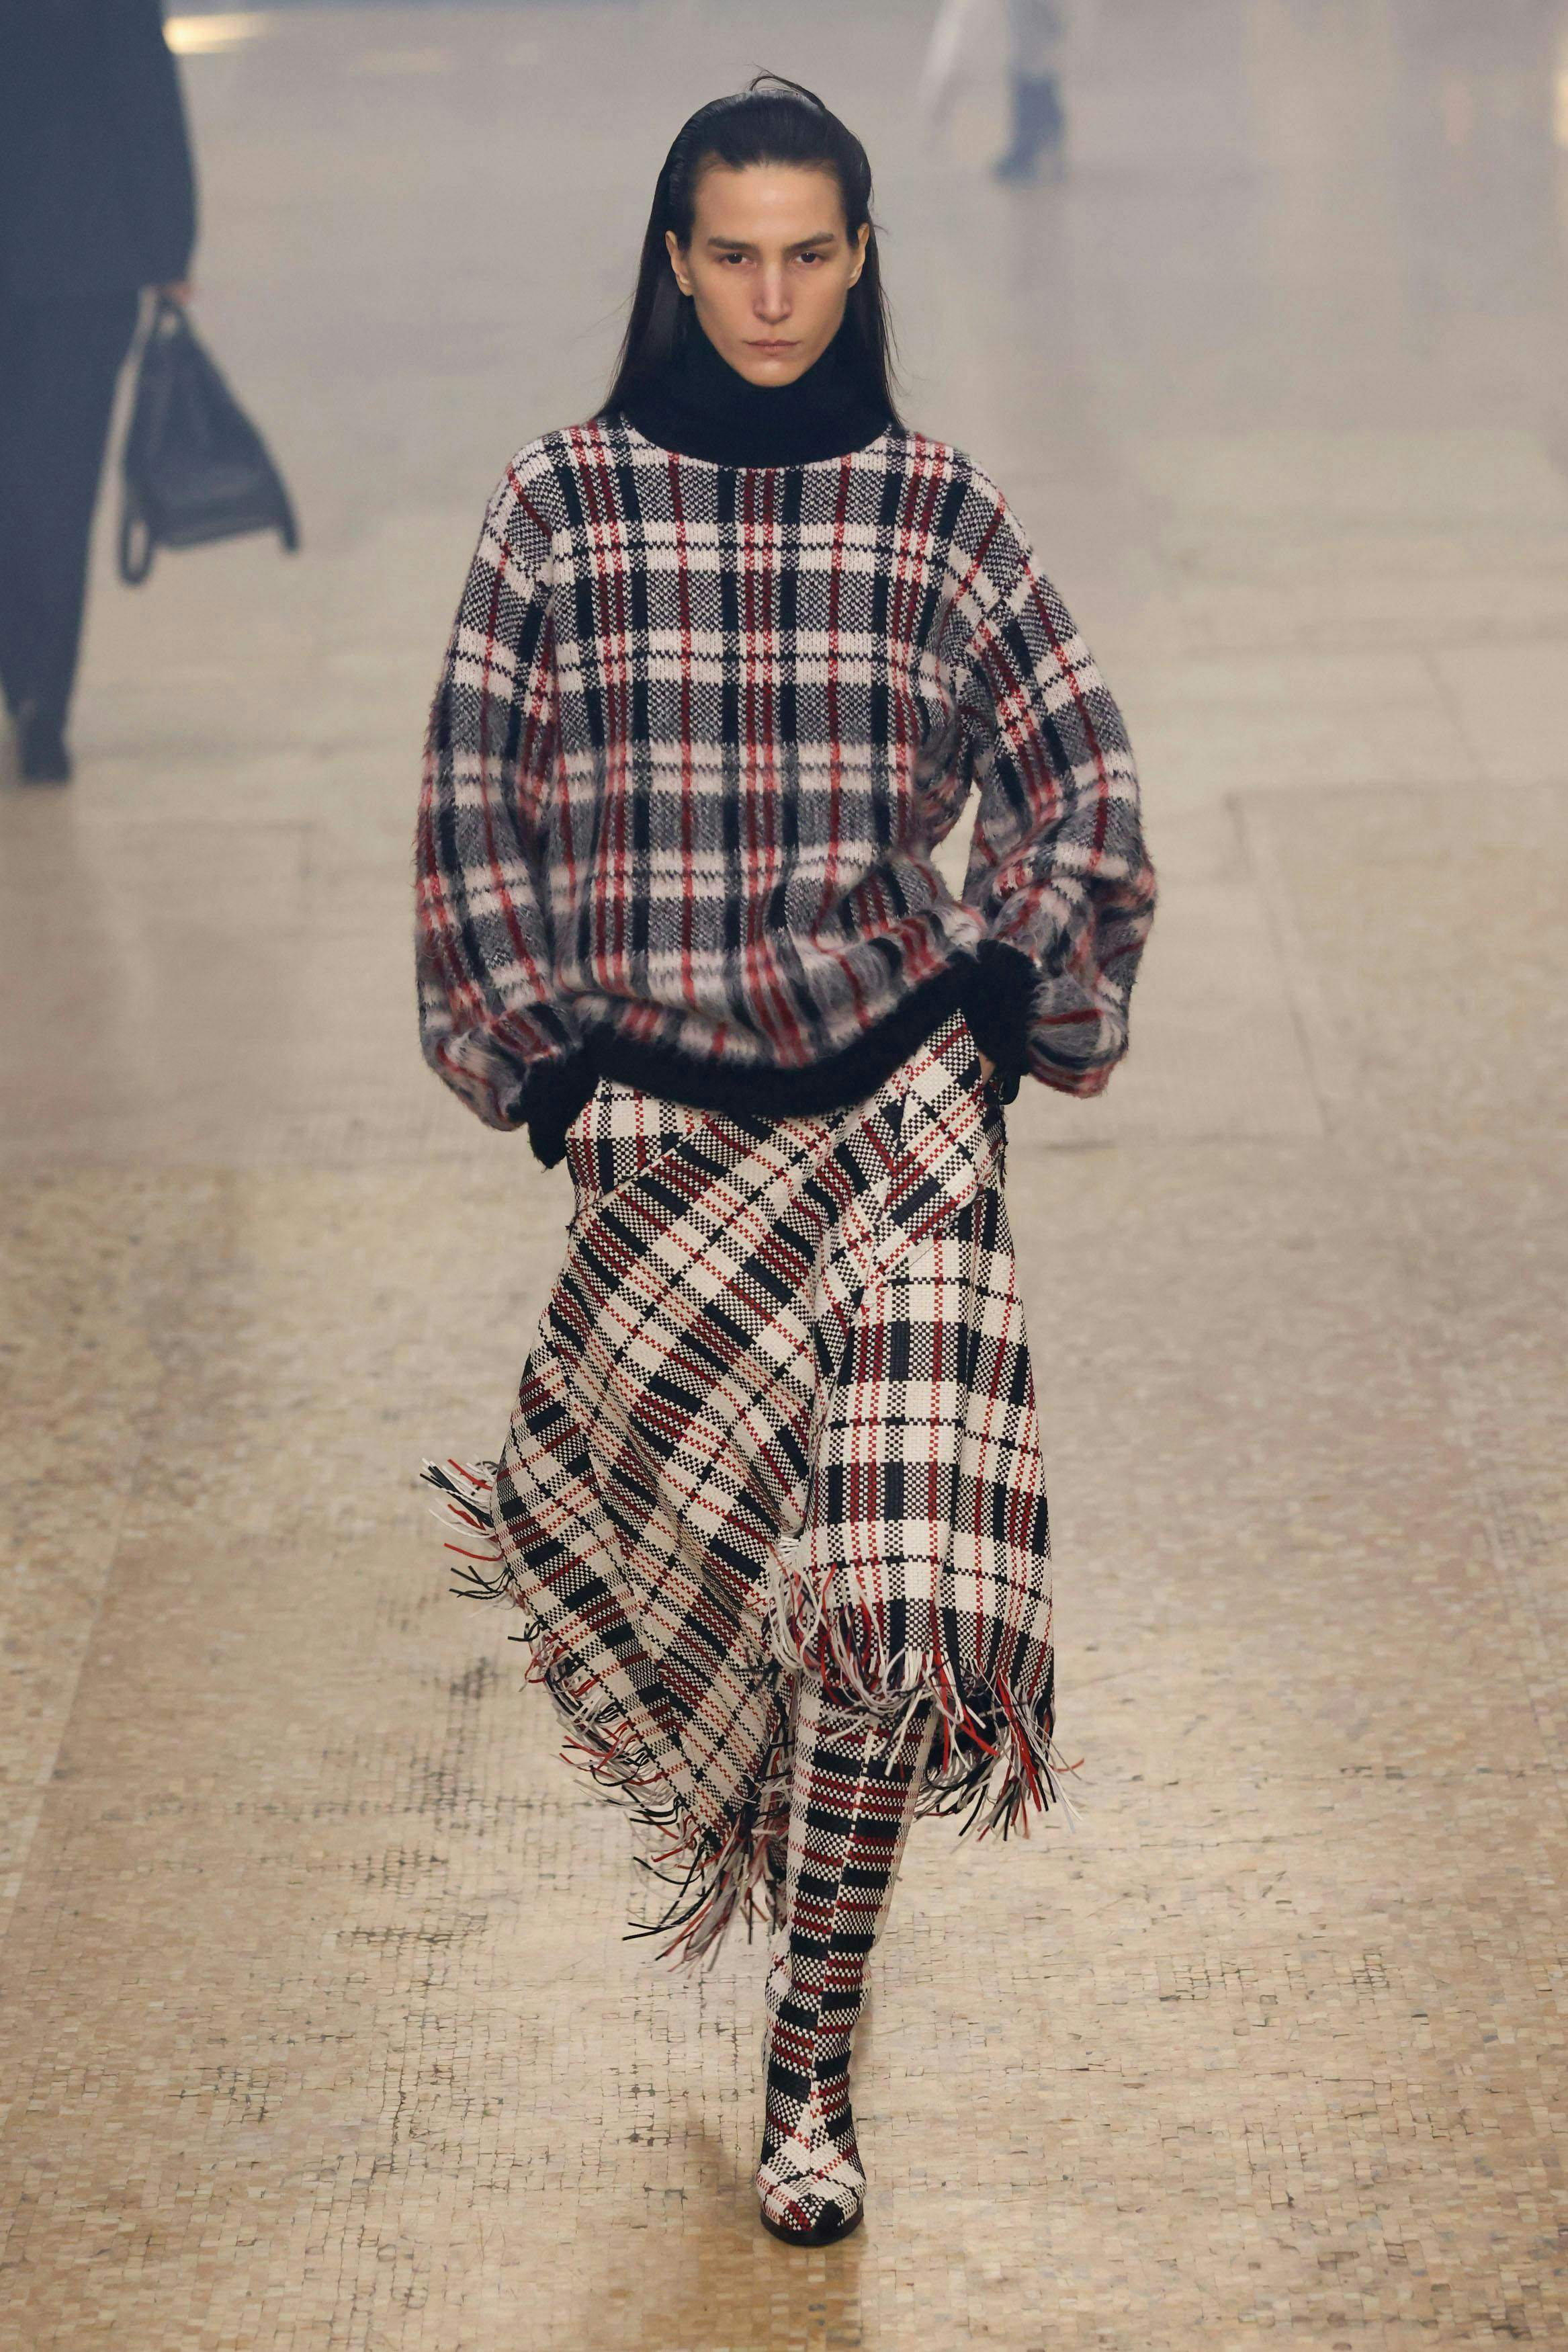 model on runway wearing plaid sweater and scarf